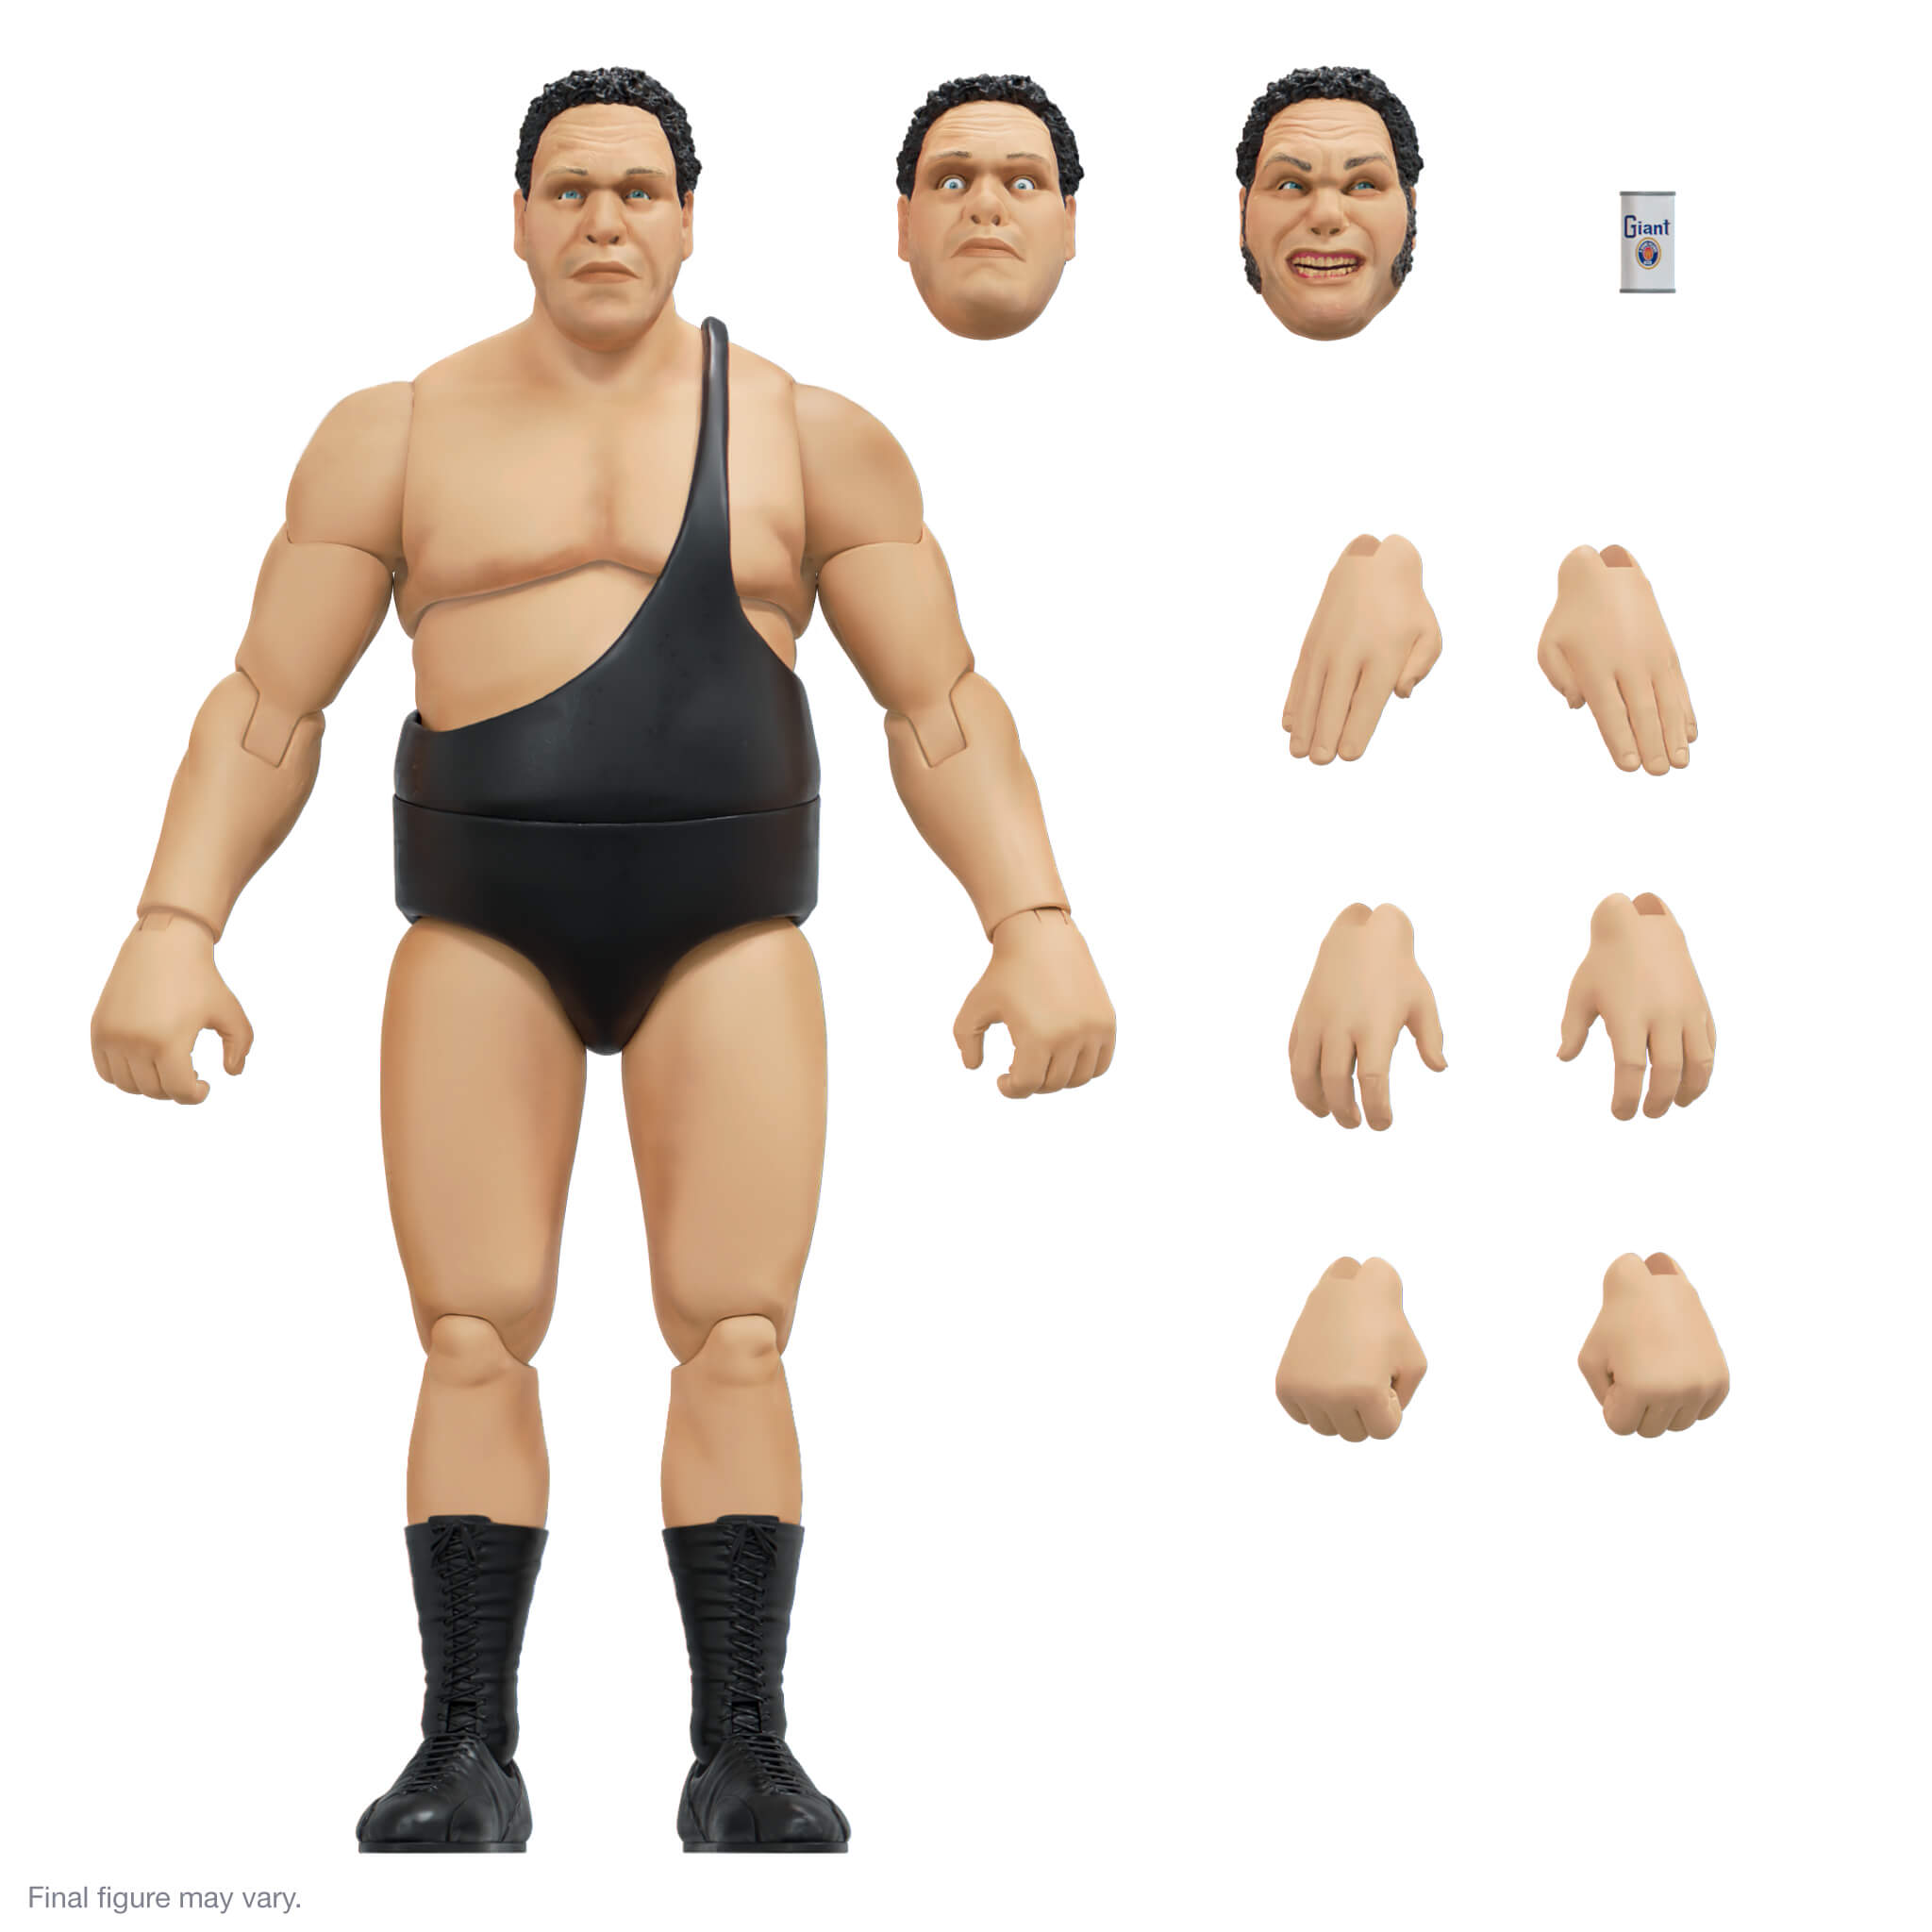 Andre the Giant ULTIMATES! Figure - Black Singlet